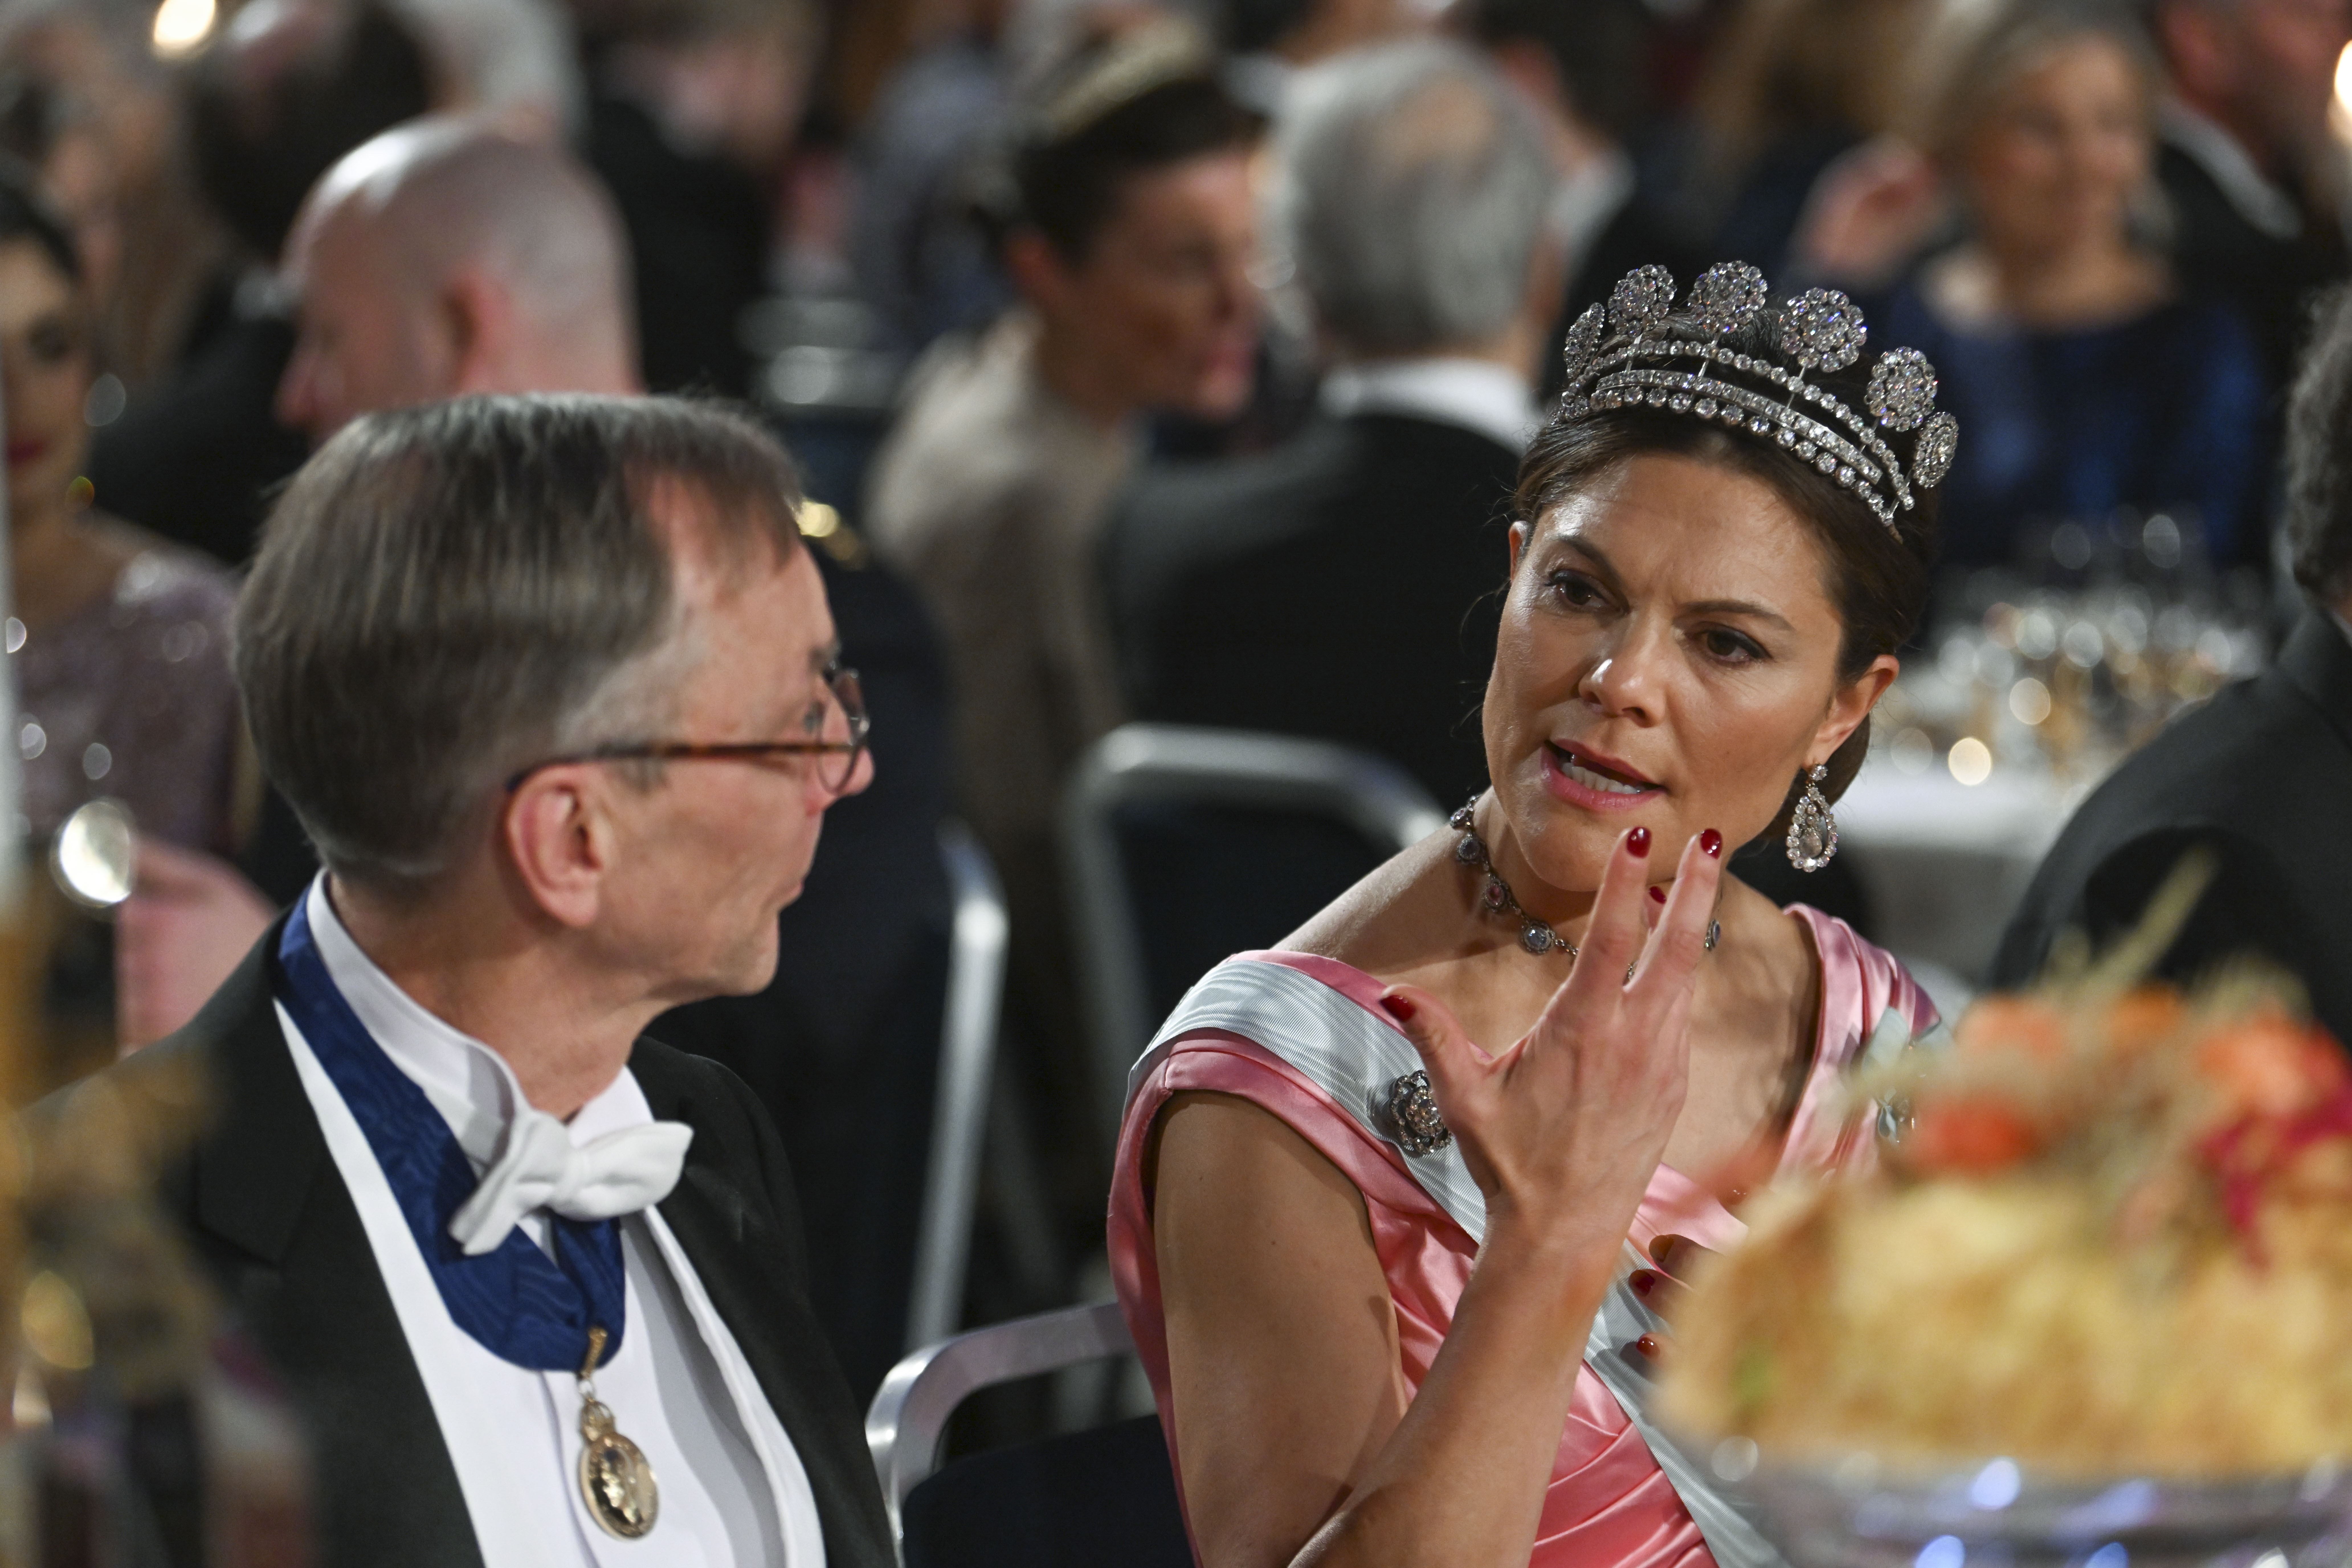 King Carl XVI Gustaf and Crown Princess Victoria of Sweden Have Arrived at  the Coronation of King Charles III